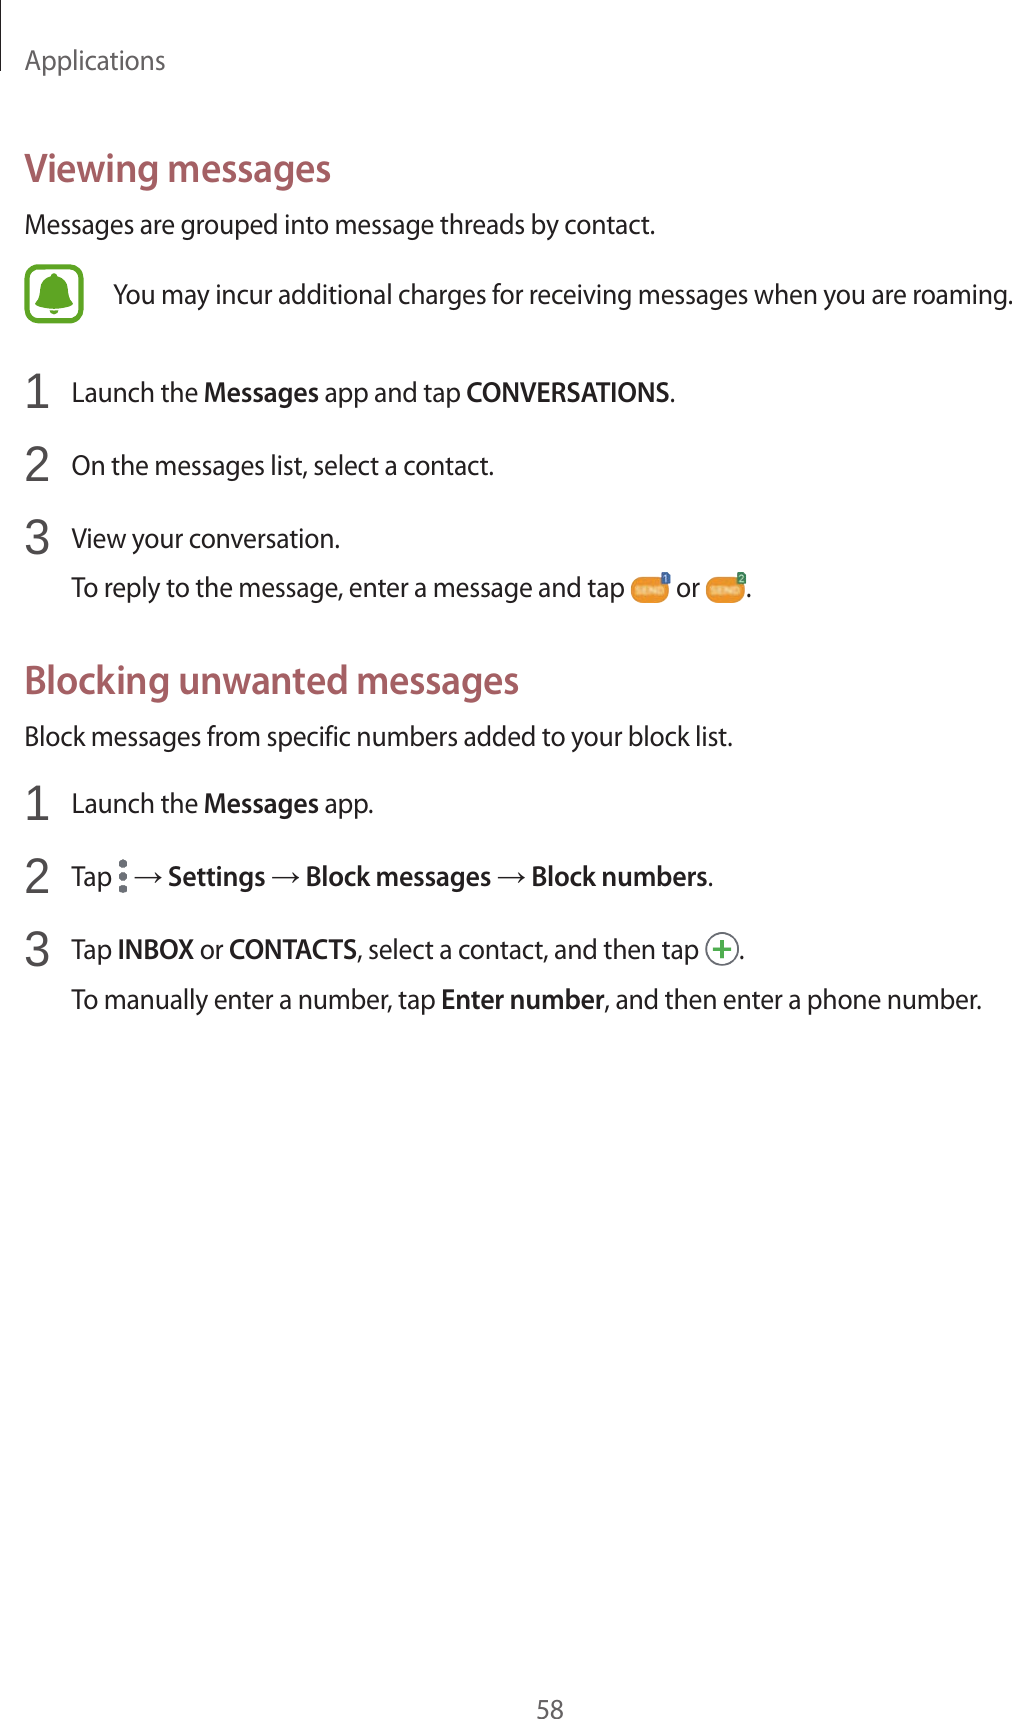 Applications58Viewing messagesMessages are grouped into message threads by contact.You may incur additional charges for receiving messages when you are roaming.1  Launch the Messages app and tap CONVERSATIONS.2  On the messages list, select a contact.3  View your conversation.To reply to the message, enter a message and tap   or  .Blocking unwanted messagesBlock messages from specific numbers added to your block list.1  Launch the Messages app.2  Tap   → Settings → Block messages → Block numbers.3  Tap INBOX or CONTACTS, select a contact, and then tap  .To manually enter a number, tap Enter number, and then enter a phone number.